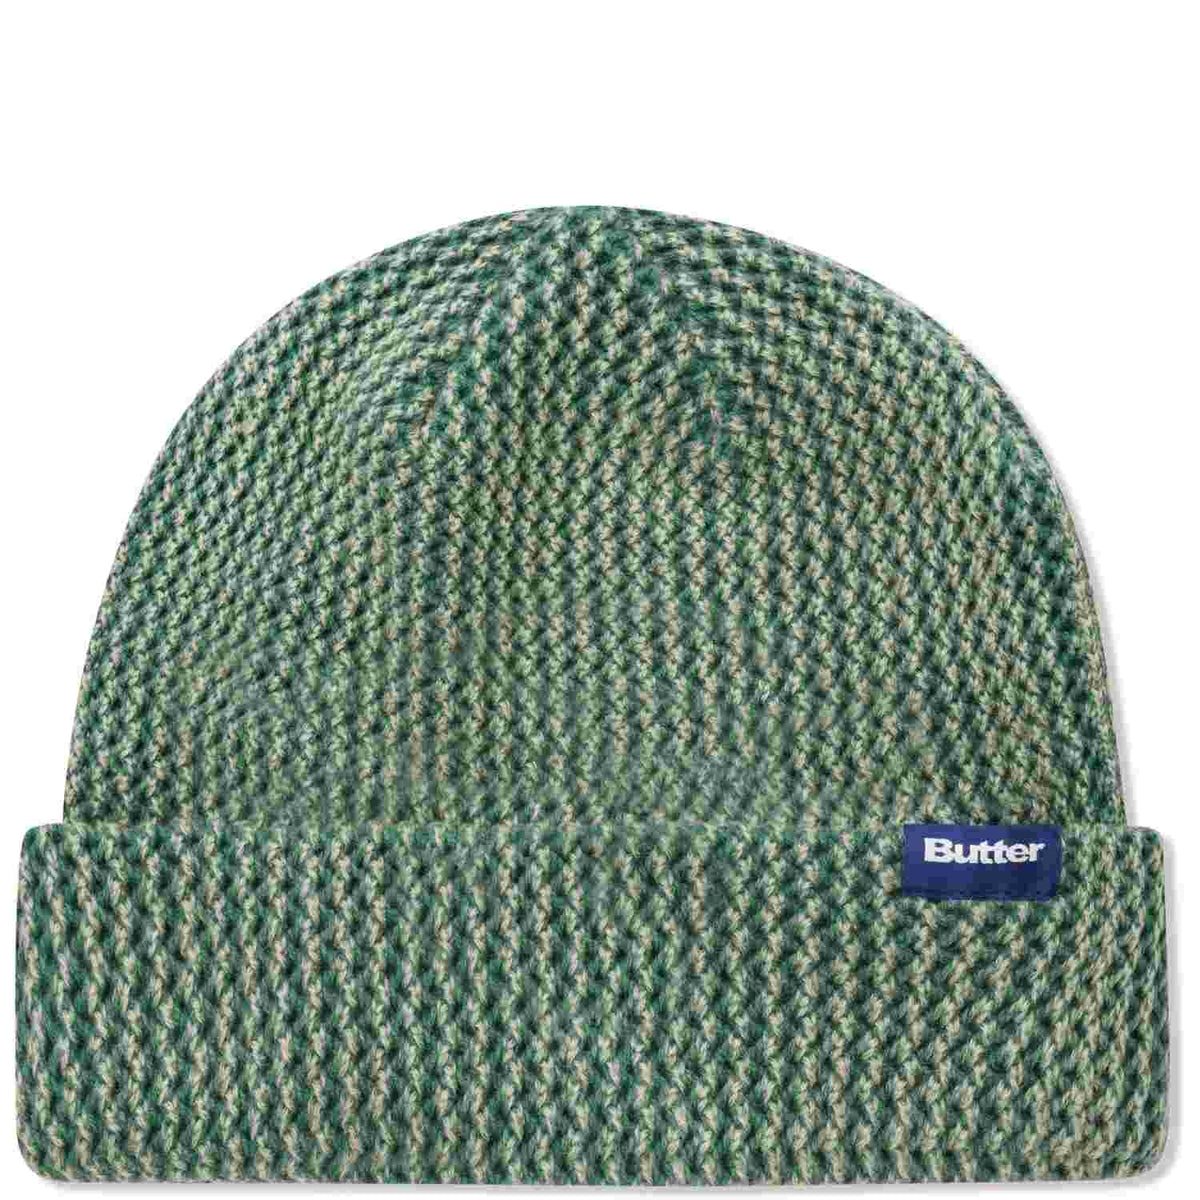 Butter Goods - Dyed Beanie - Washed Army